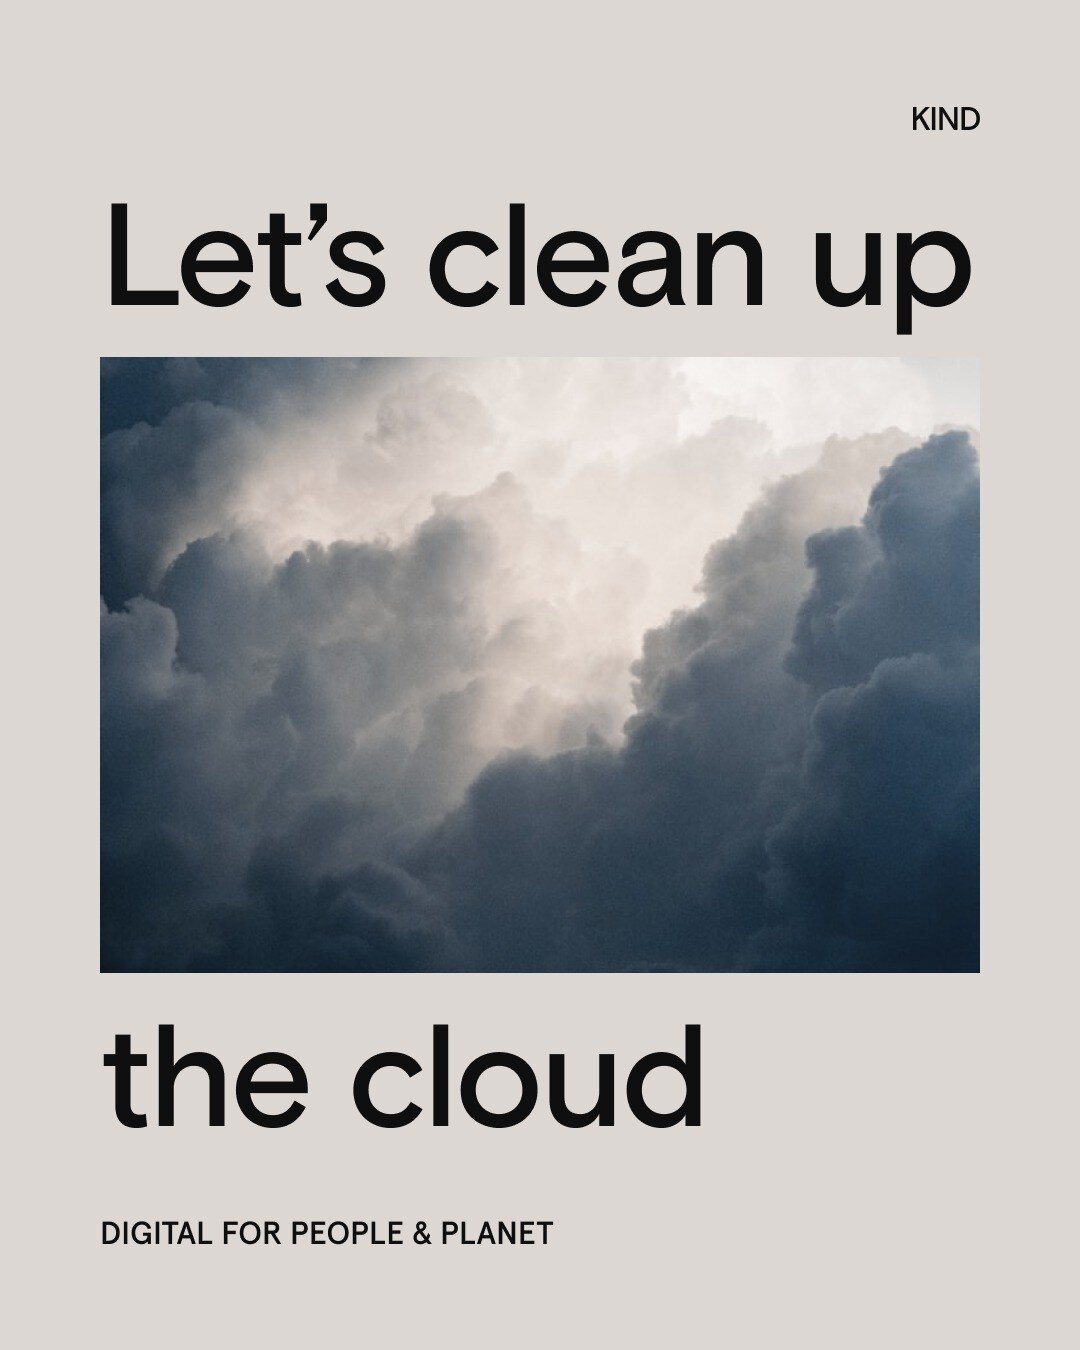 Today is #DigitalCleanupDay 2023.

All the data we store in the cloud has a carbon footprint. By cleaning up our digital waste, we can reduce the energy needed to store data and its related carbon emissions.

&quot;Some studies estimate that the inte